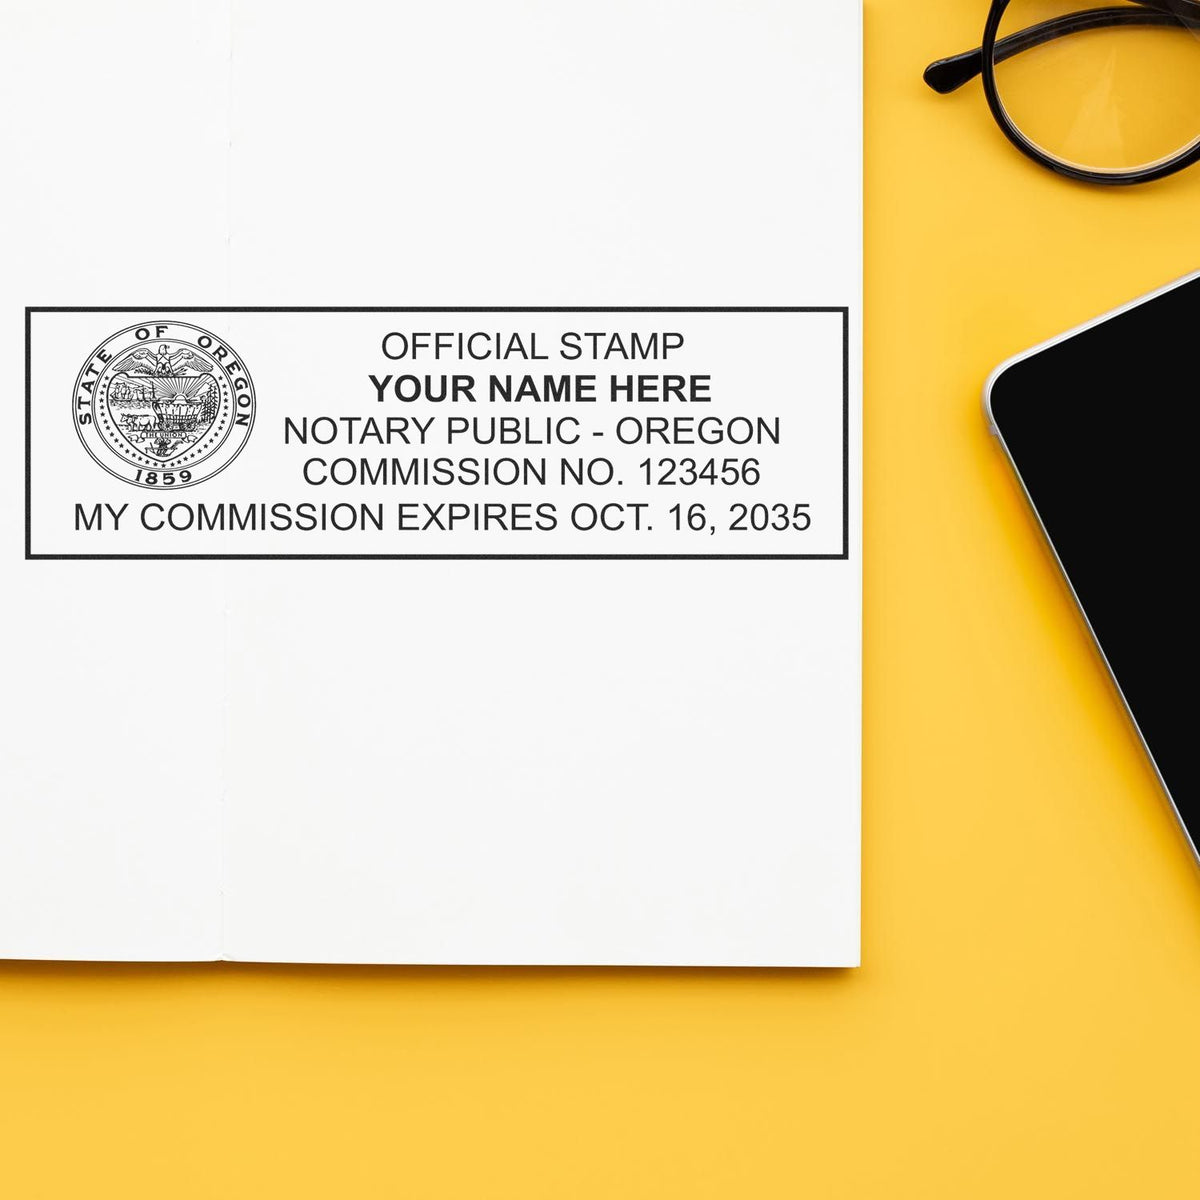 The Super Slim Oregon Notary Public Stamp stamp impression comes to life with a crisp, detailed photo on paper - showcasing true professional quality.